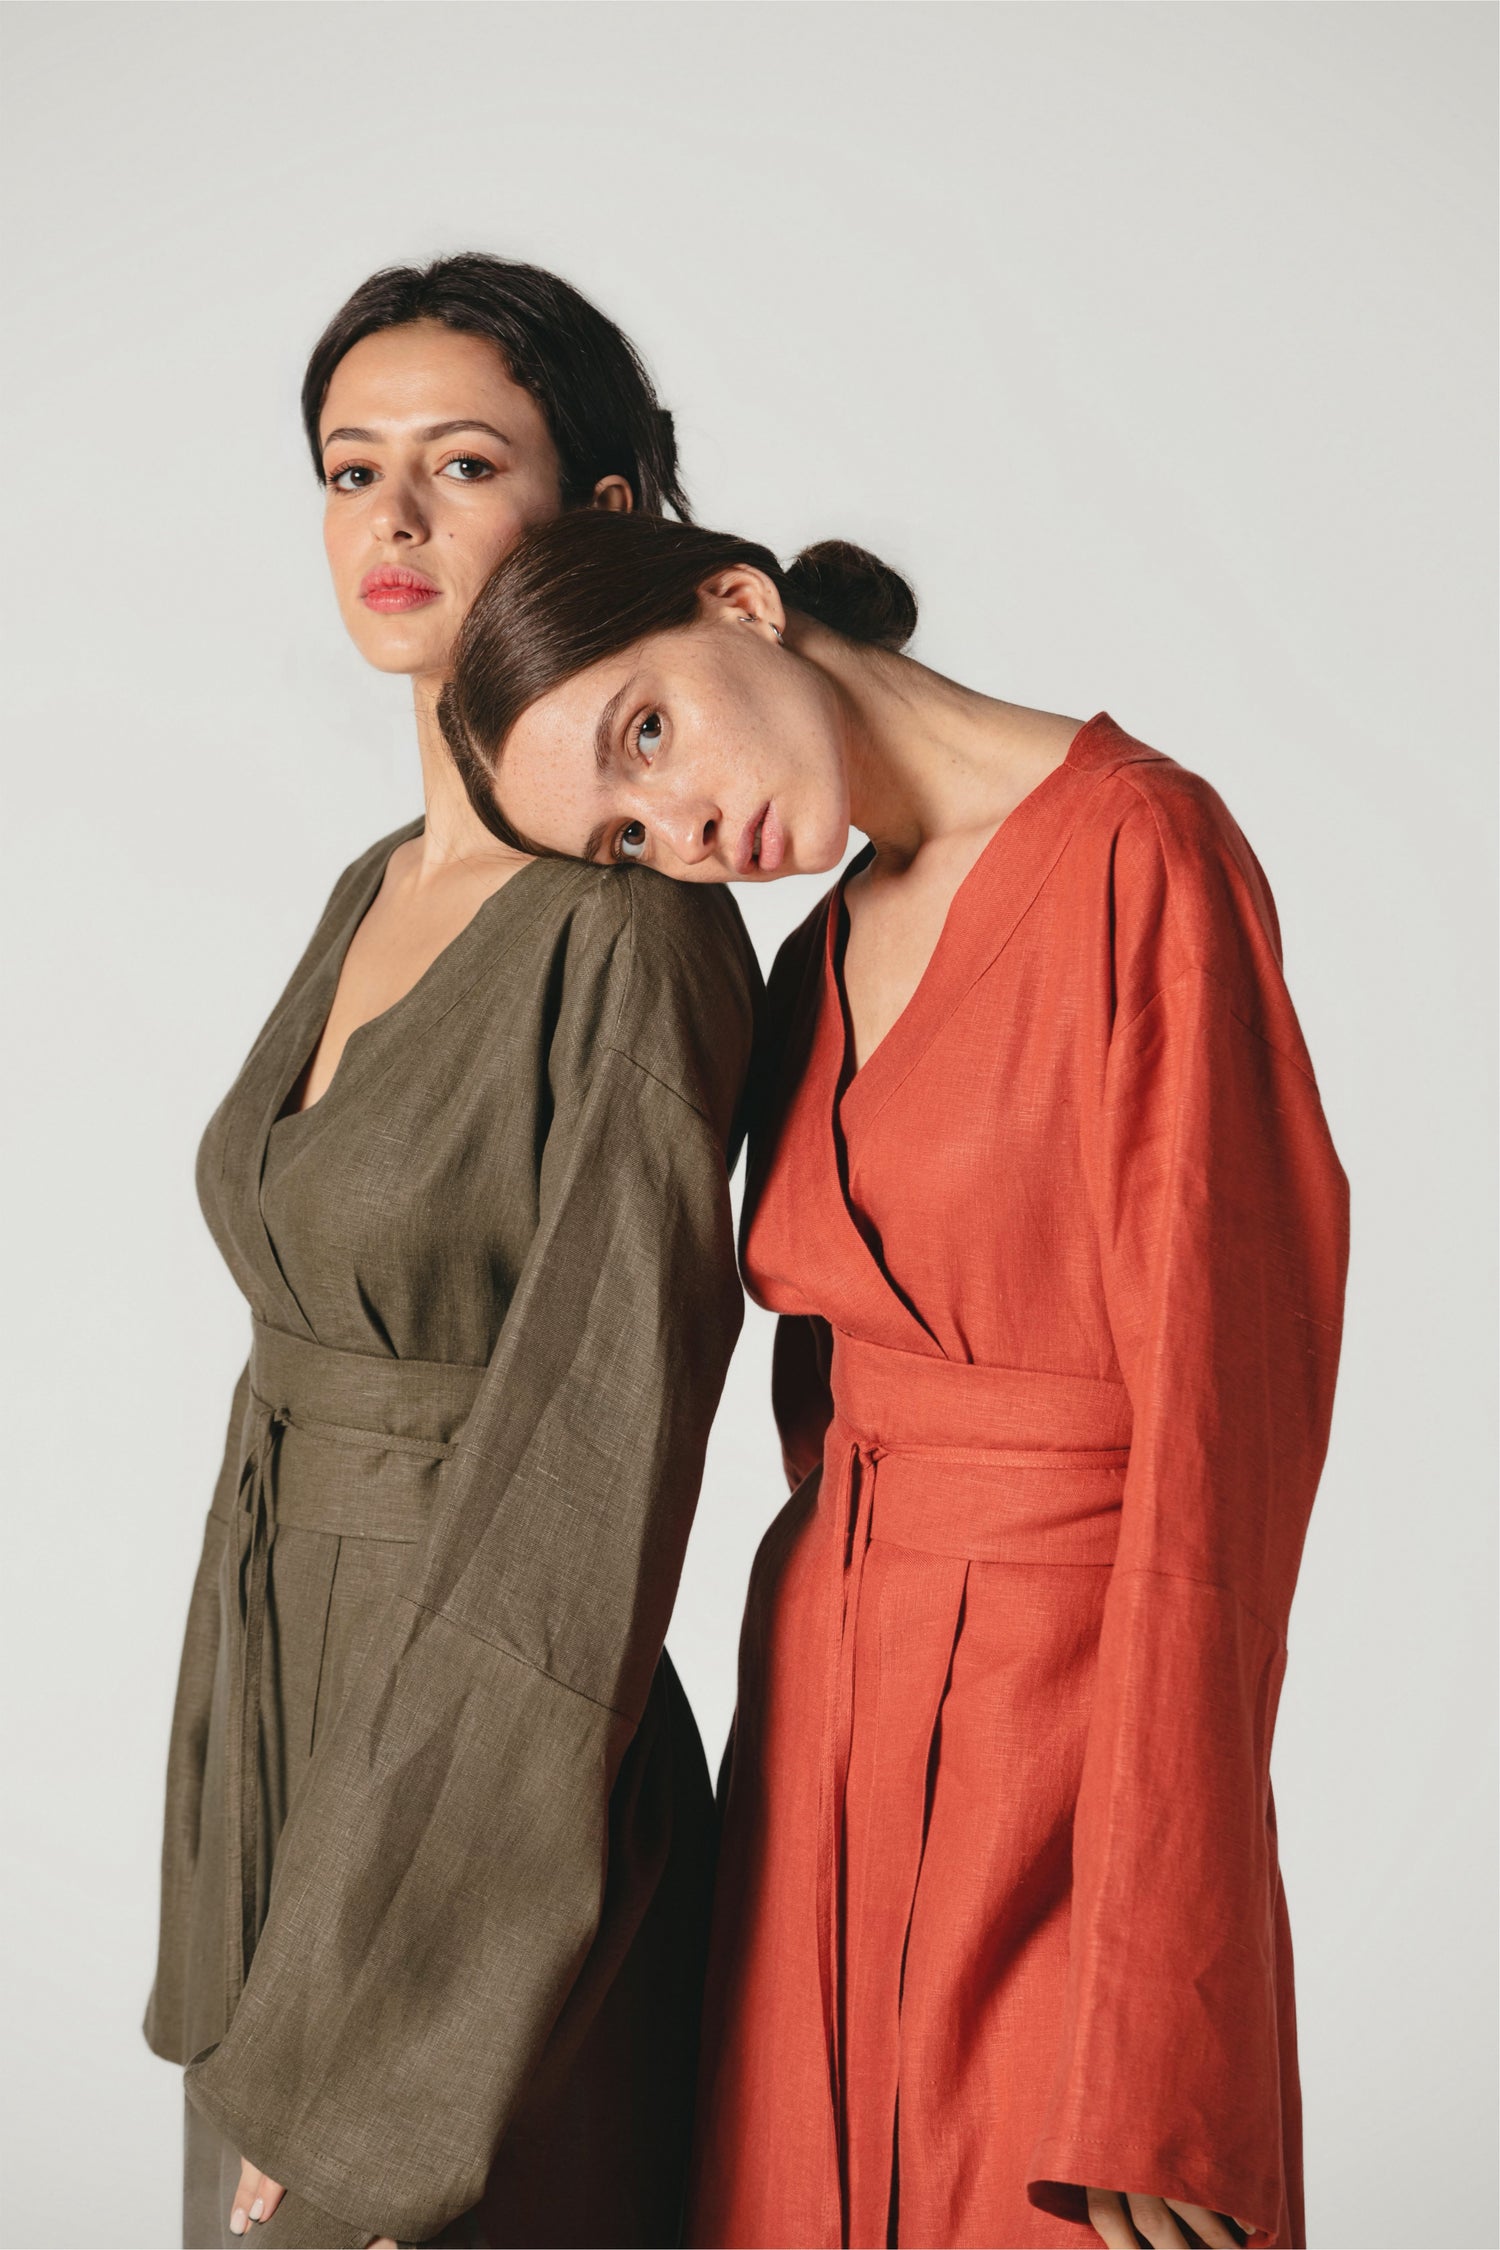 Two models showcasing our sustainable pure linen kimono dresses in dark olive green and terracotta hues. Explore sustainable fashion at Atelier Mizuni.